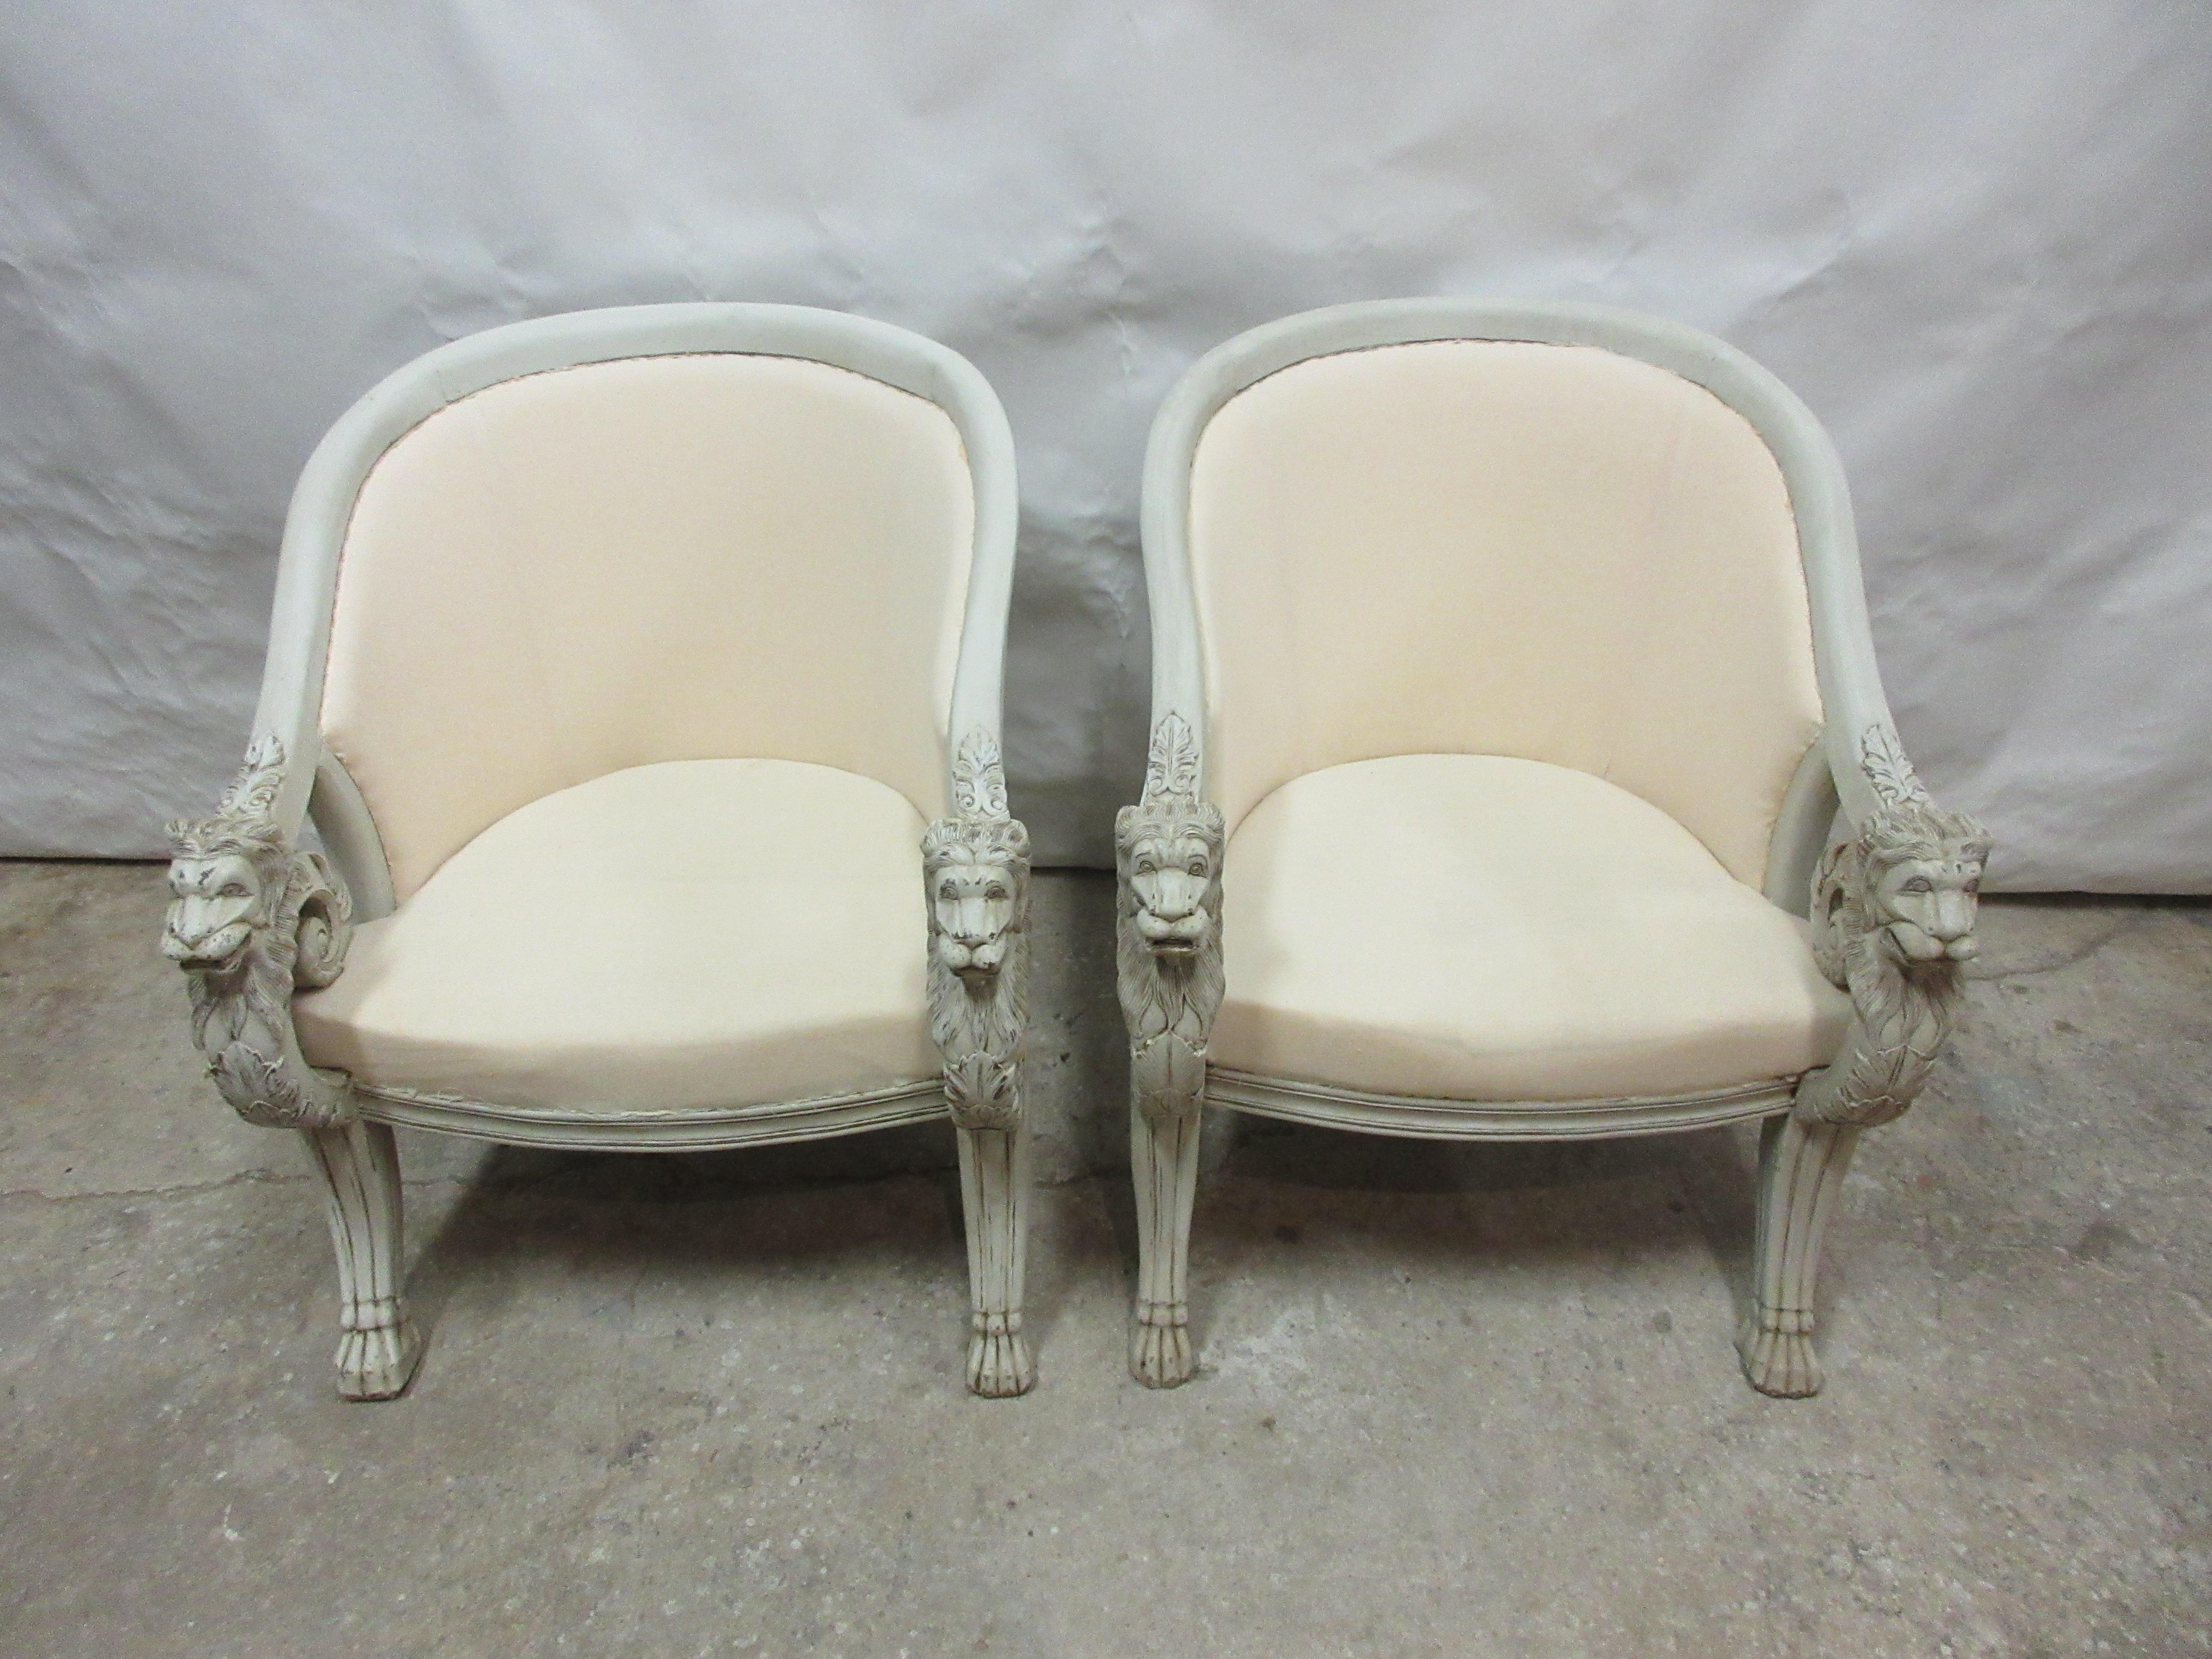 Country 2 Lions Head Berger Chairs For Sale